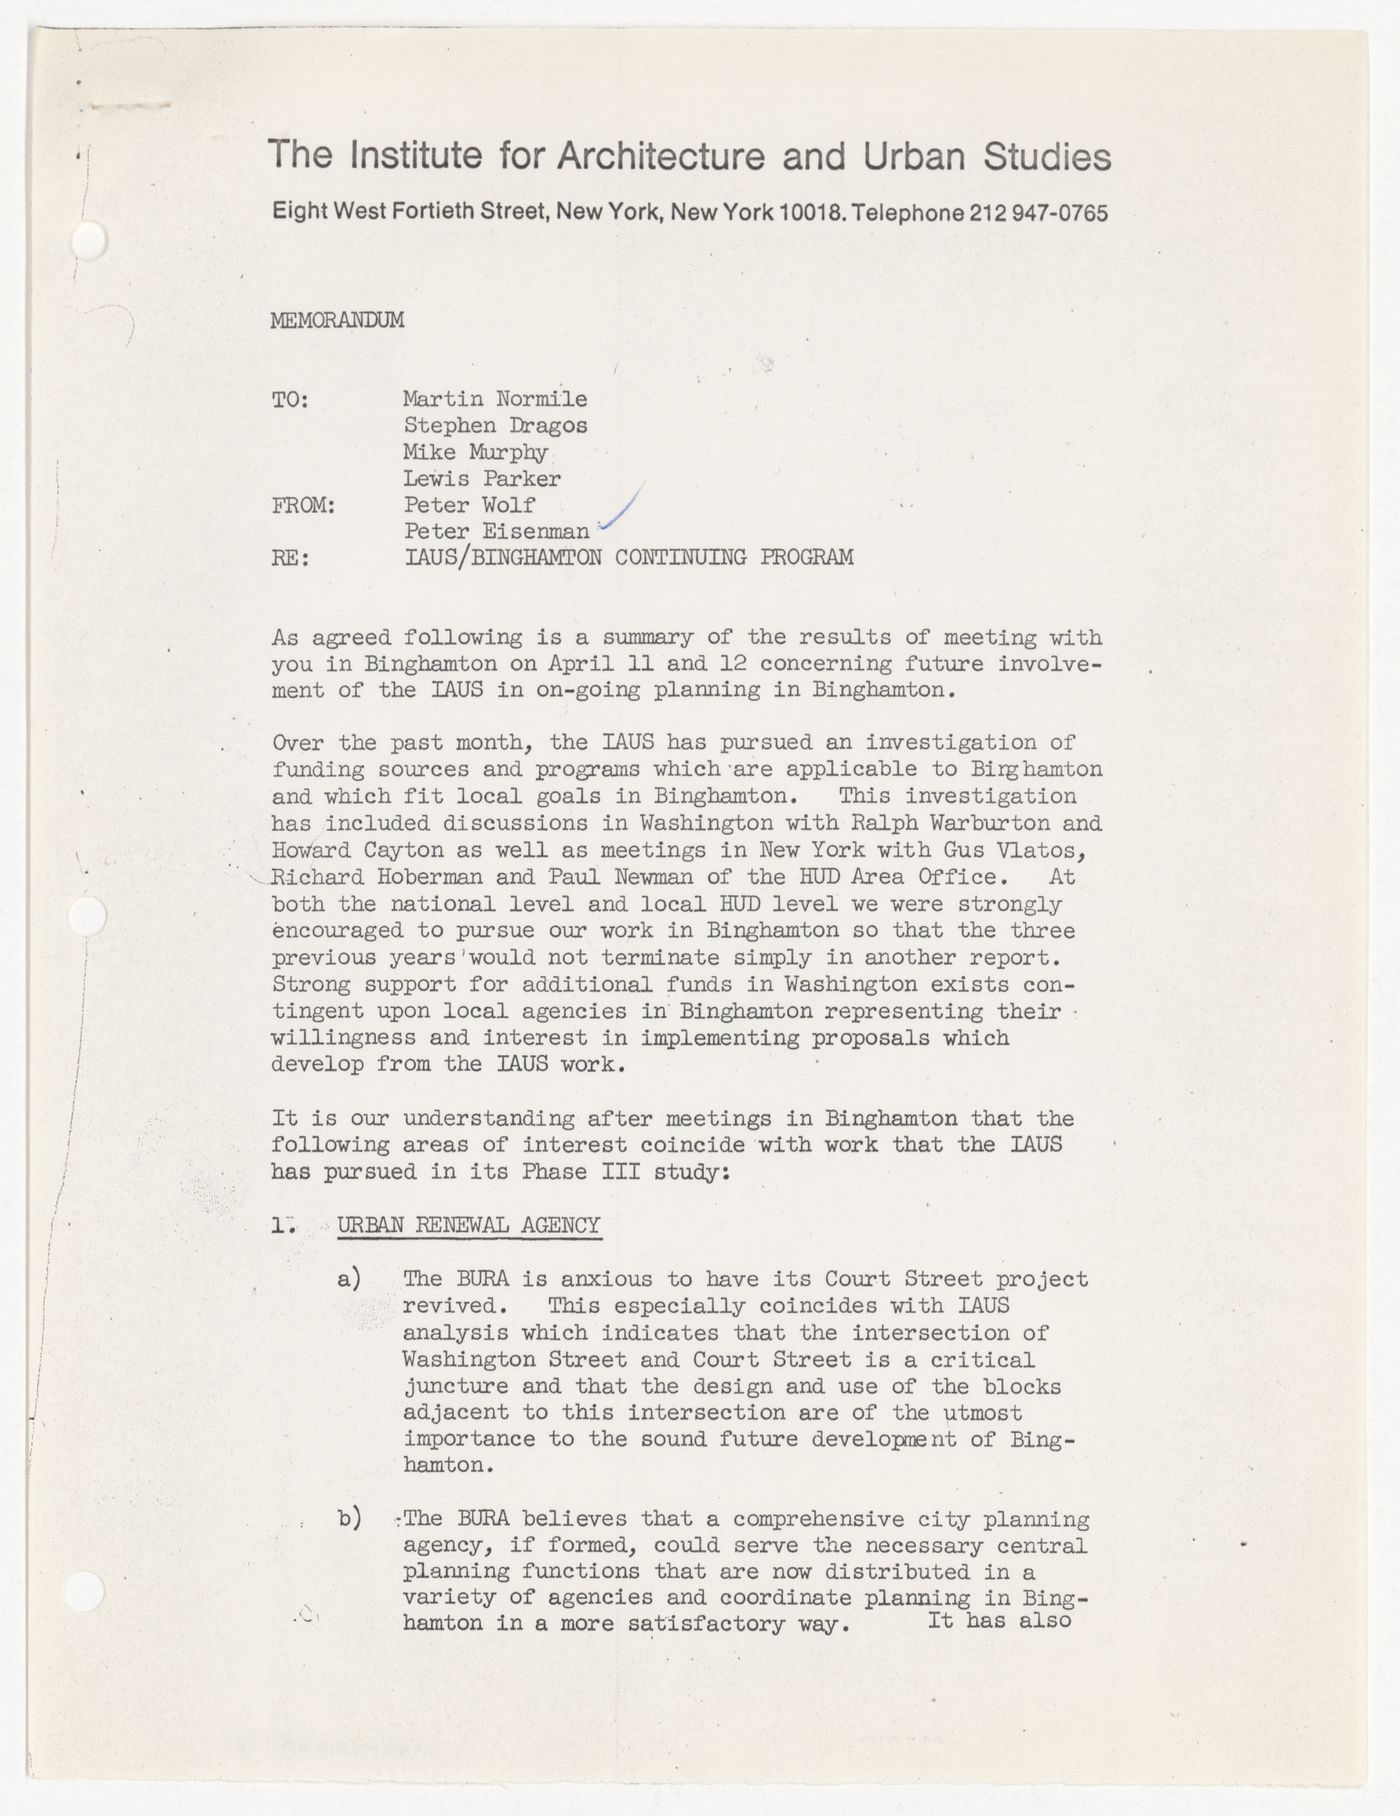 Memorandum from Peter Wolf and Peter D. Eisenman to Martin Normile, Stephen Dragos, Mike Murphy, and Lewis Parker about Binghamton Street Study continuing program